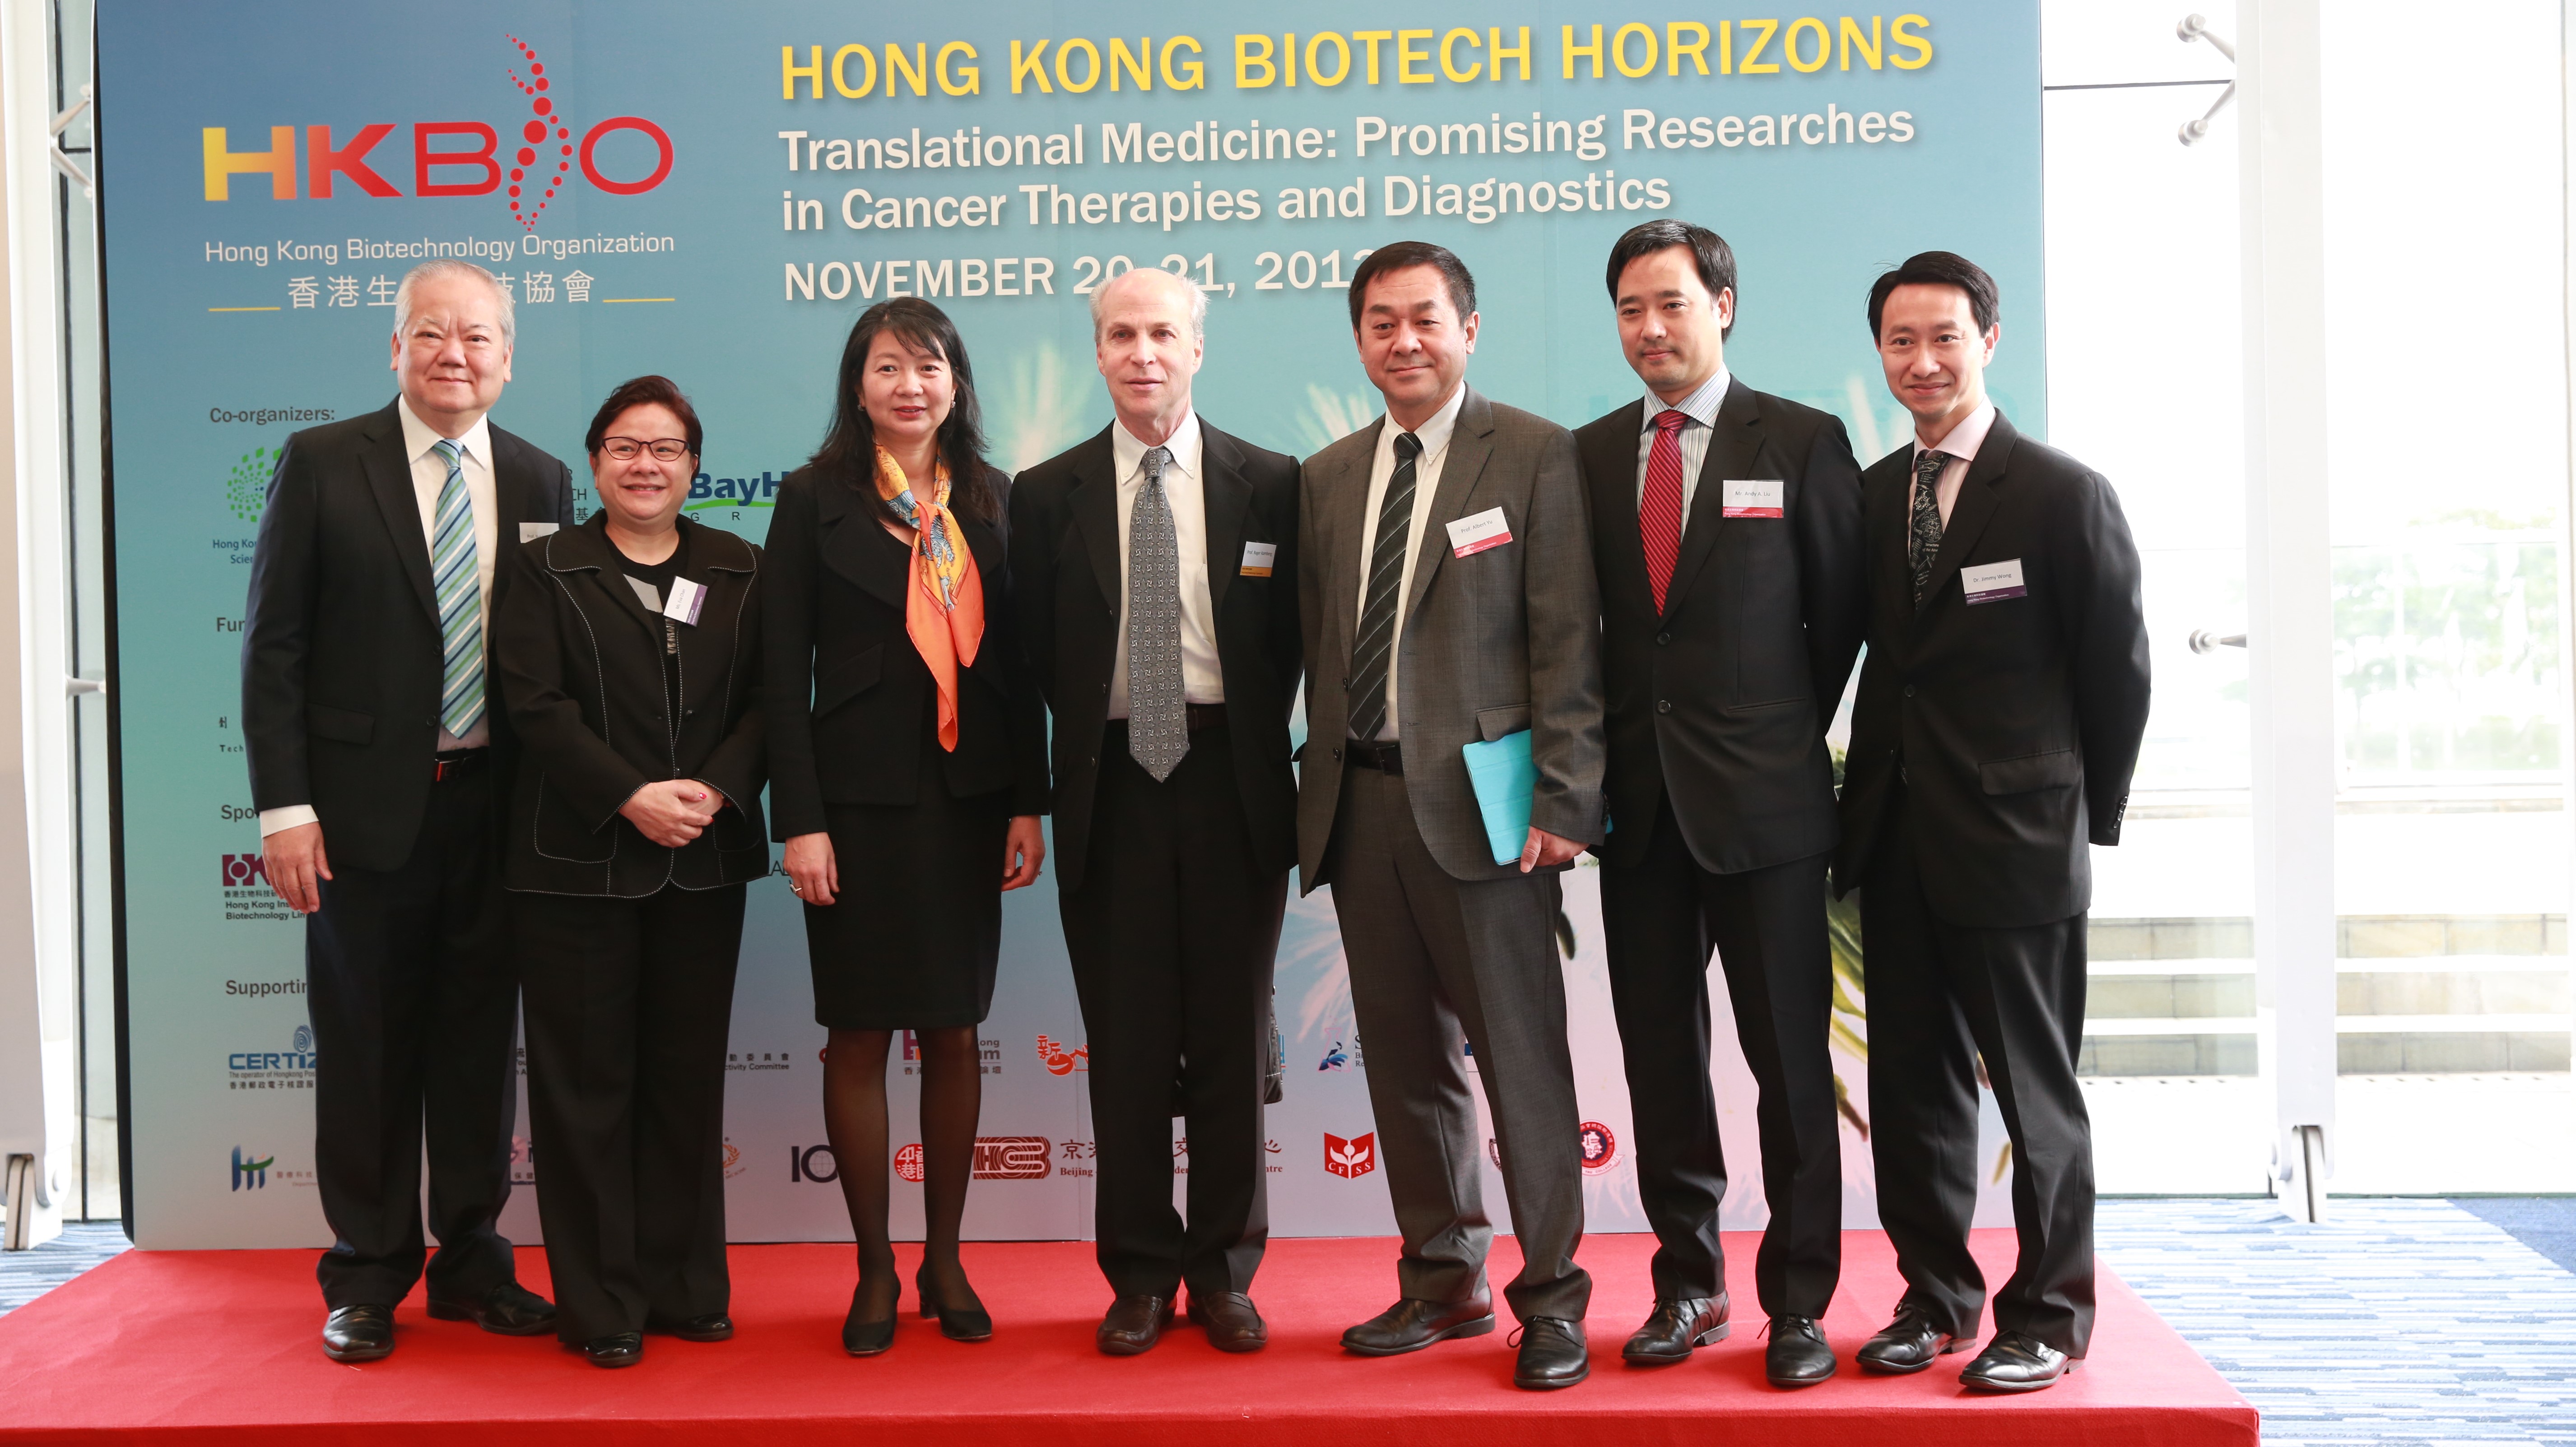 Hong Kong Biotech Horizons - Translational Medicine: Promising Researches in Cancer Therapies and Diagnostics